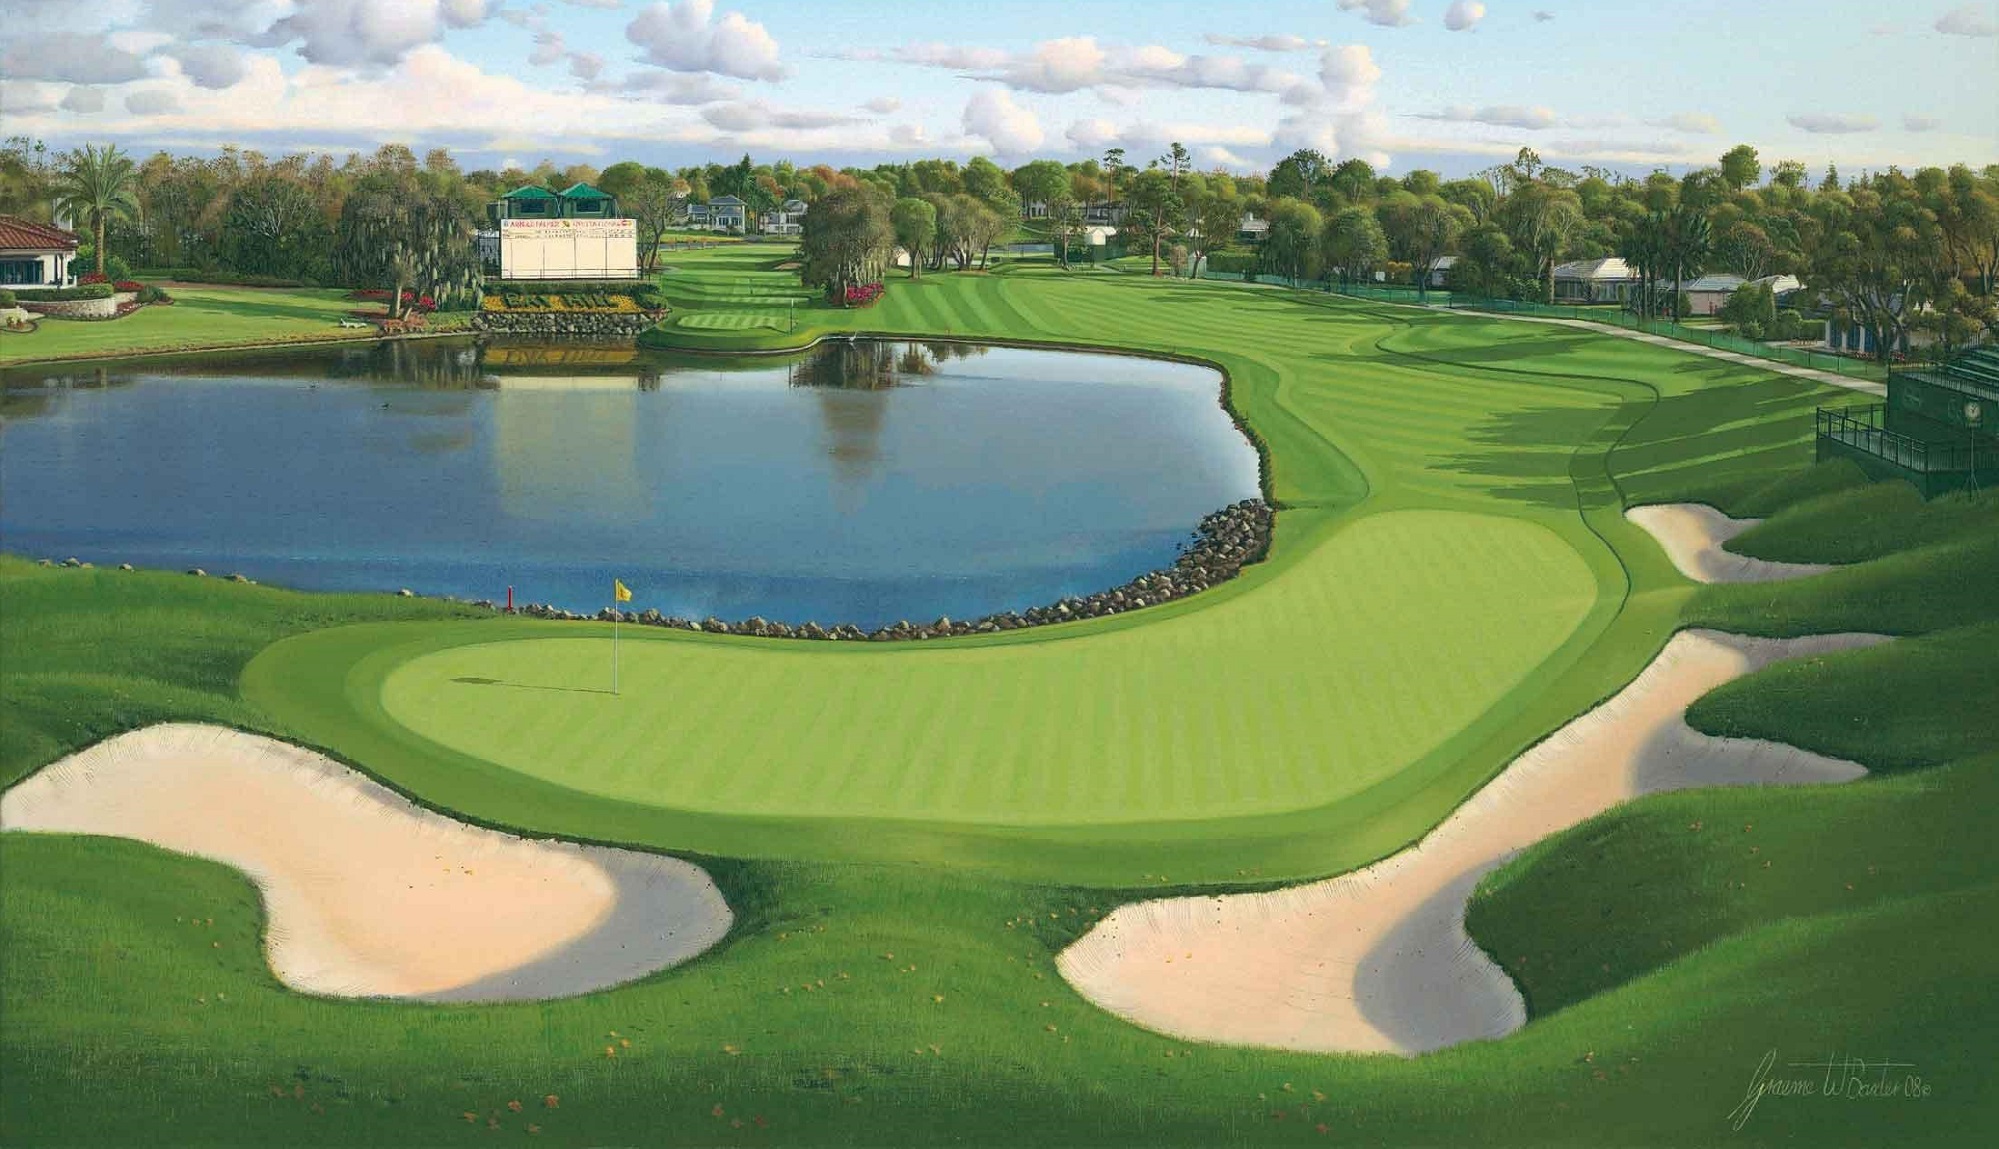 Orlando Golf Courses: Top 8 Greens for Great Games - iTripVacations